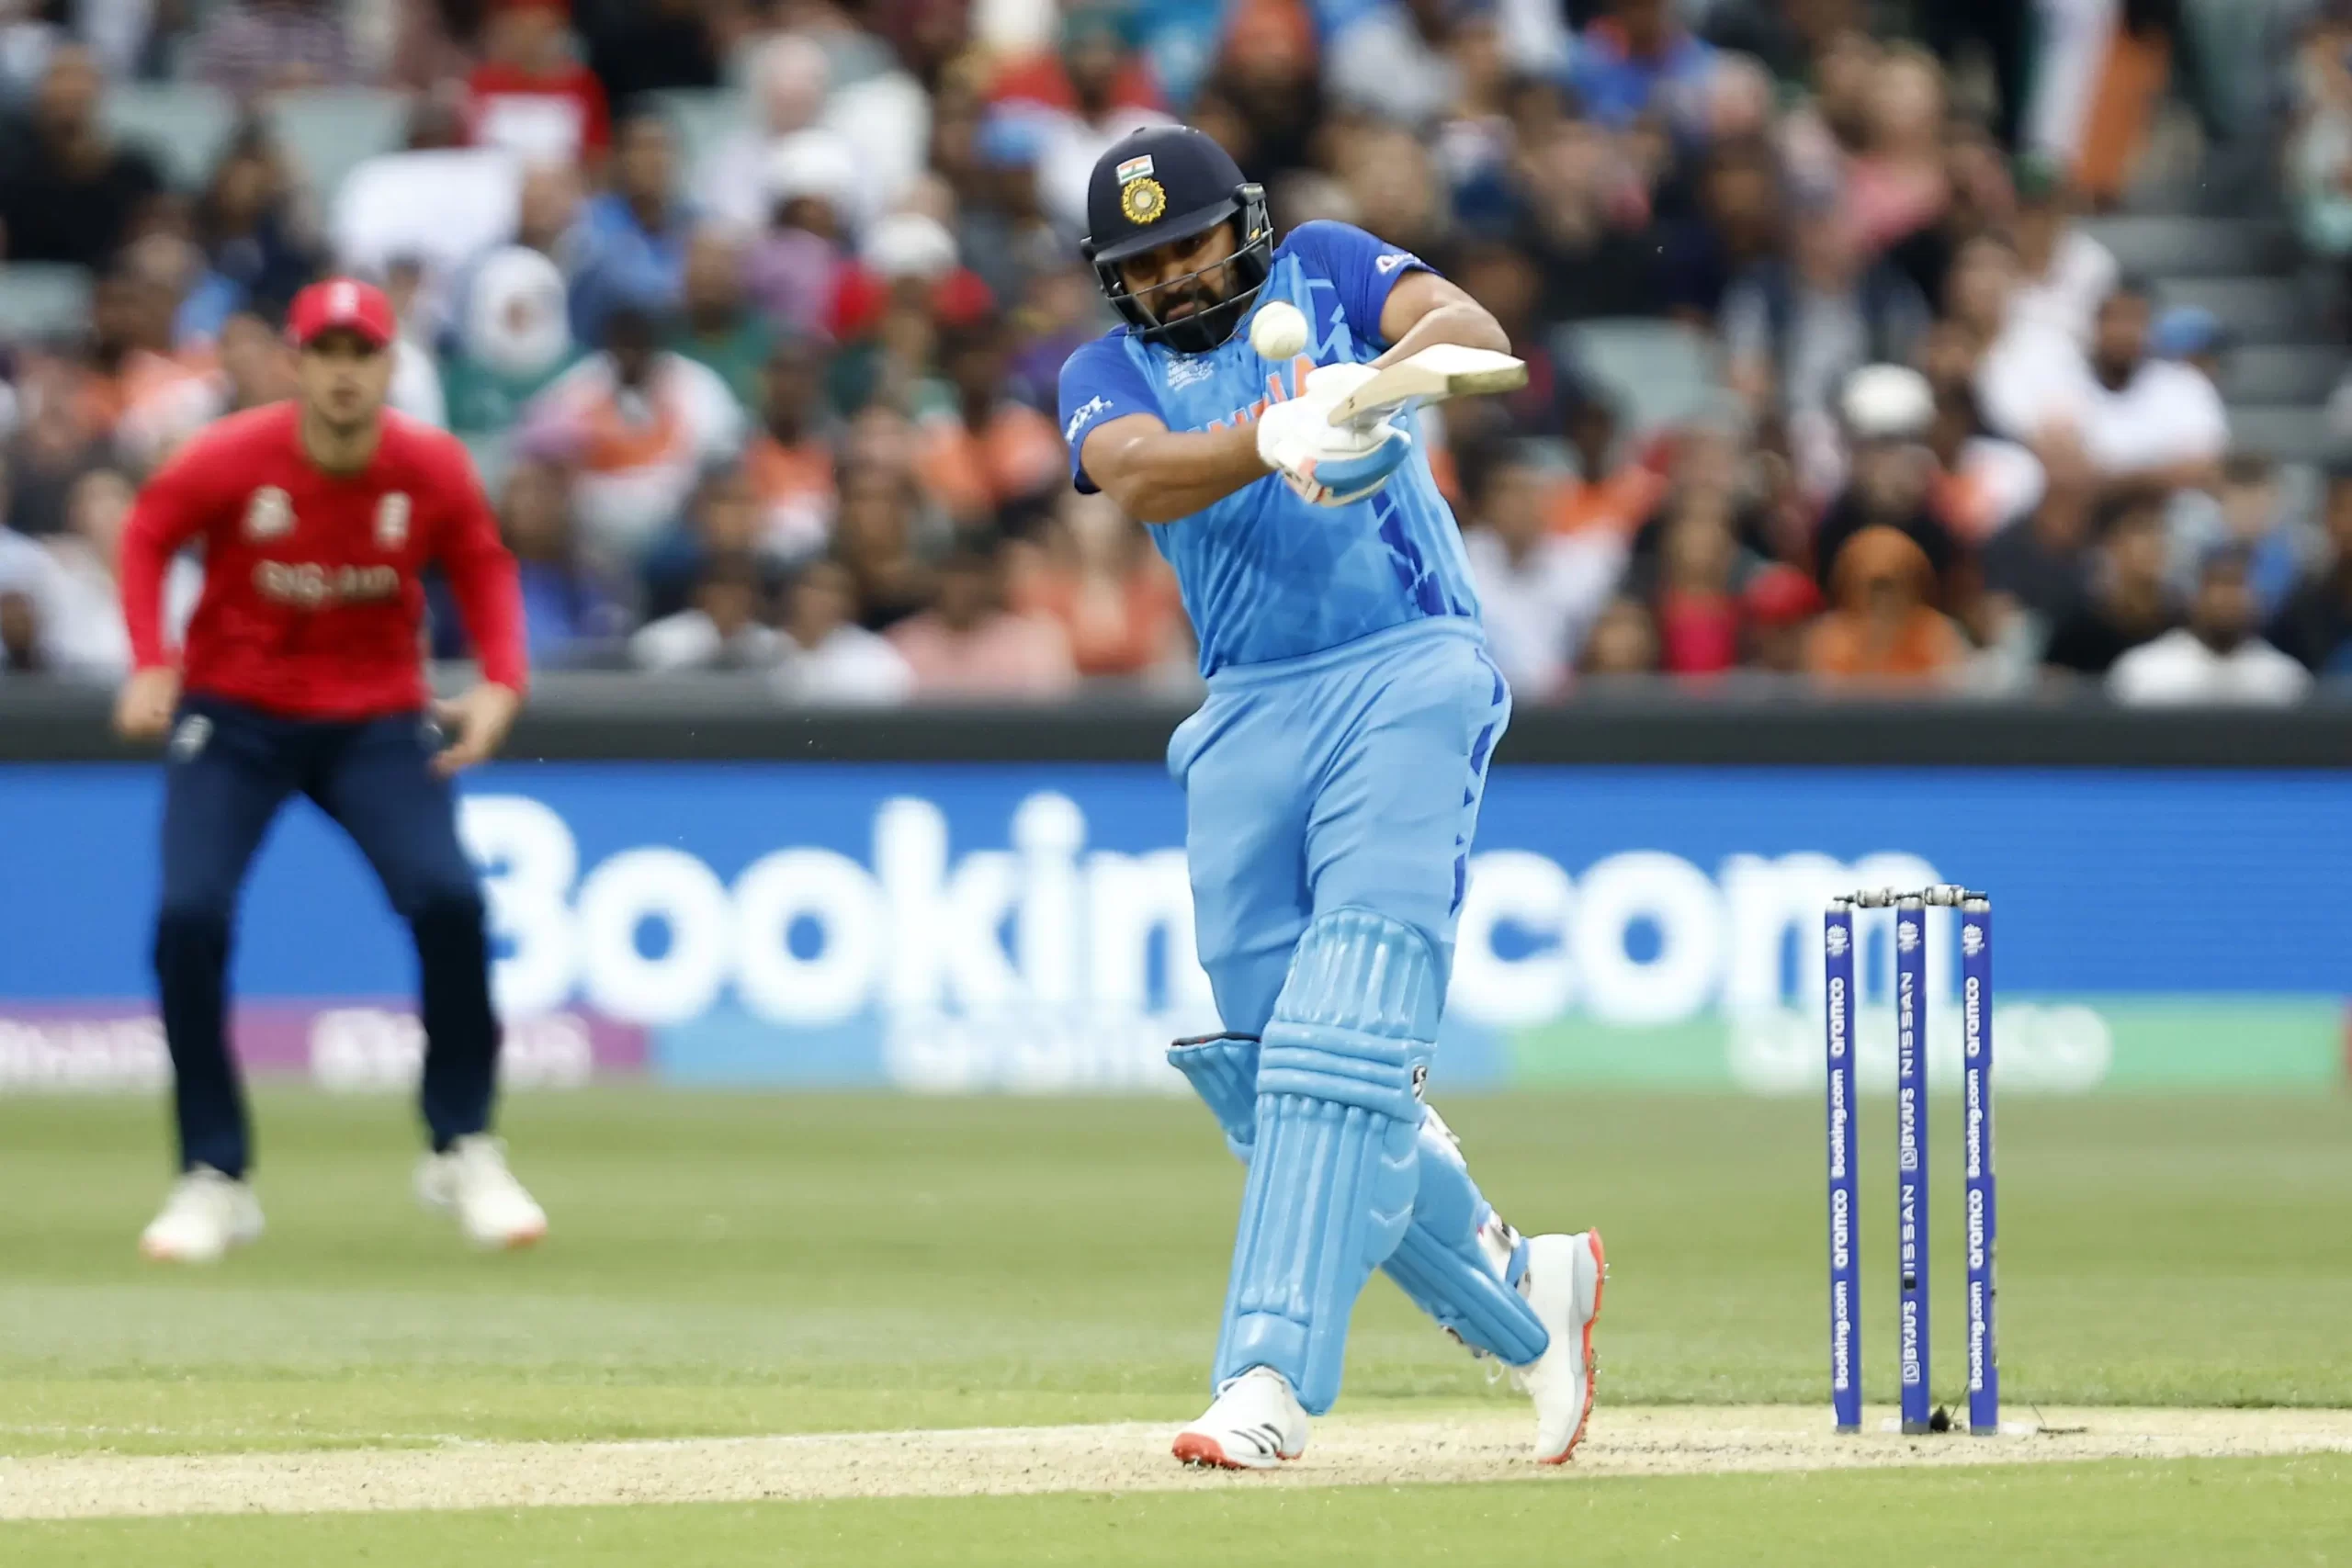 India still playing old-fashioned powerplay cricket: Nasser Hussain